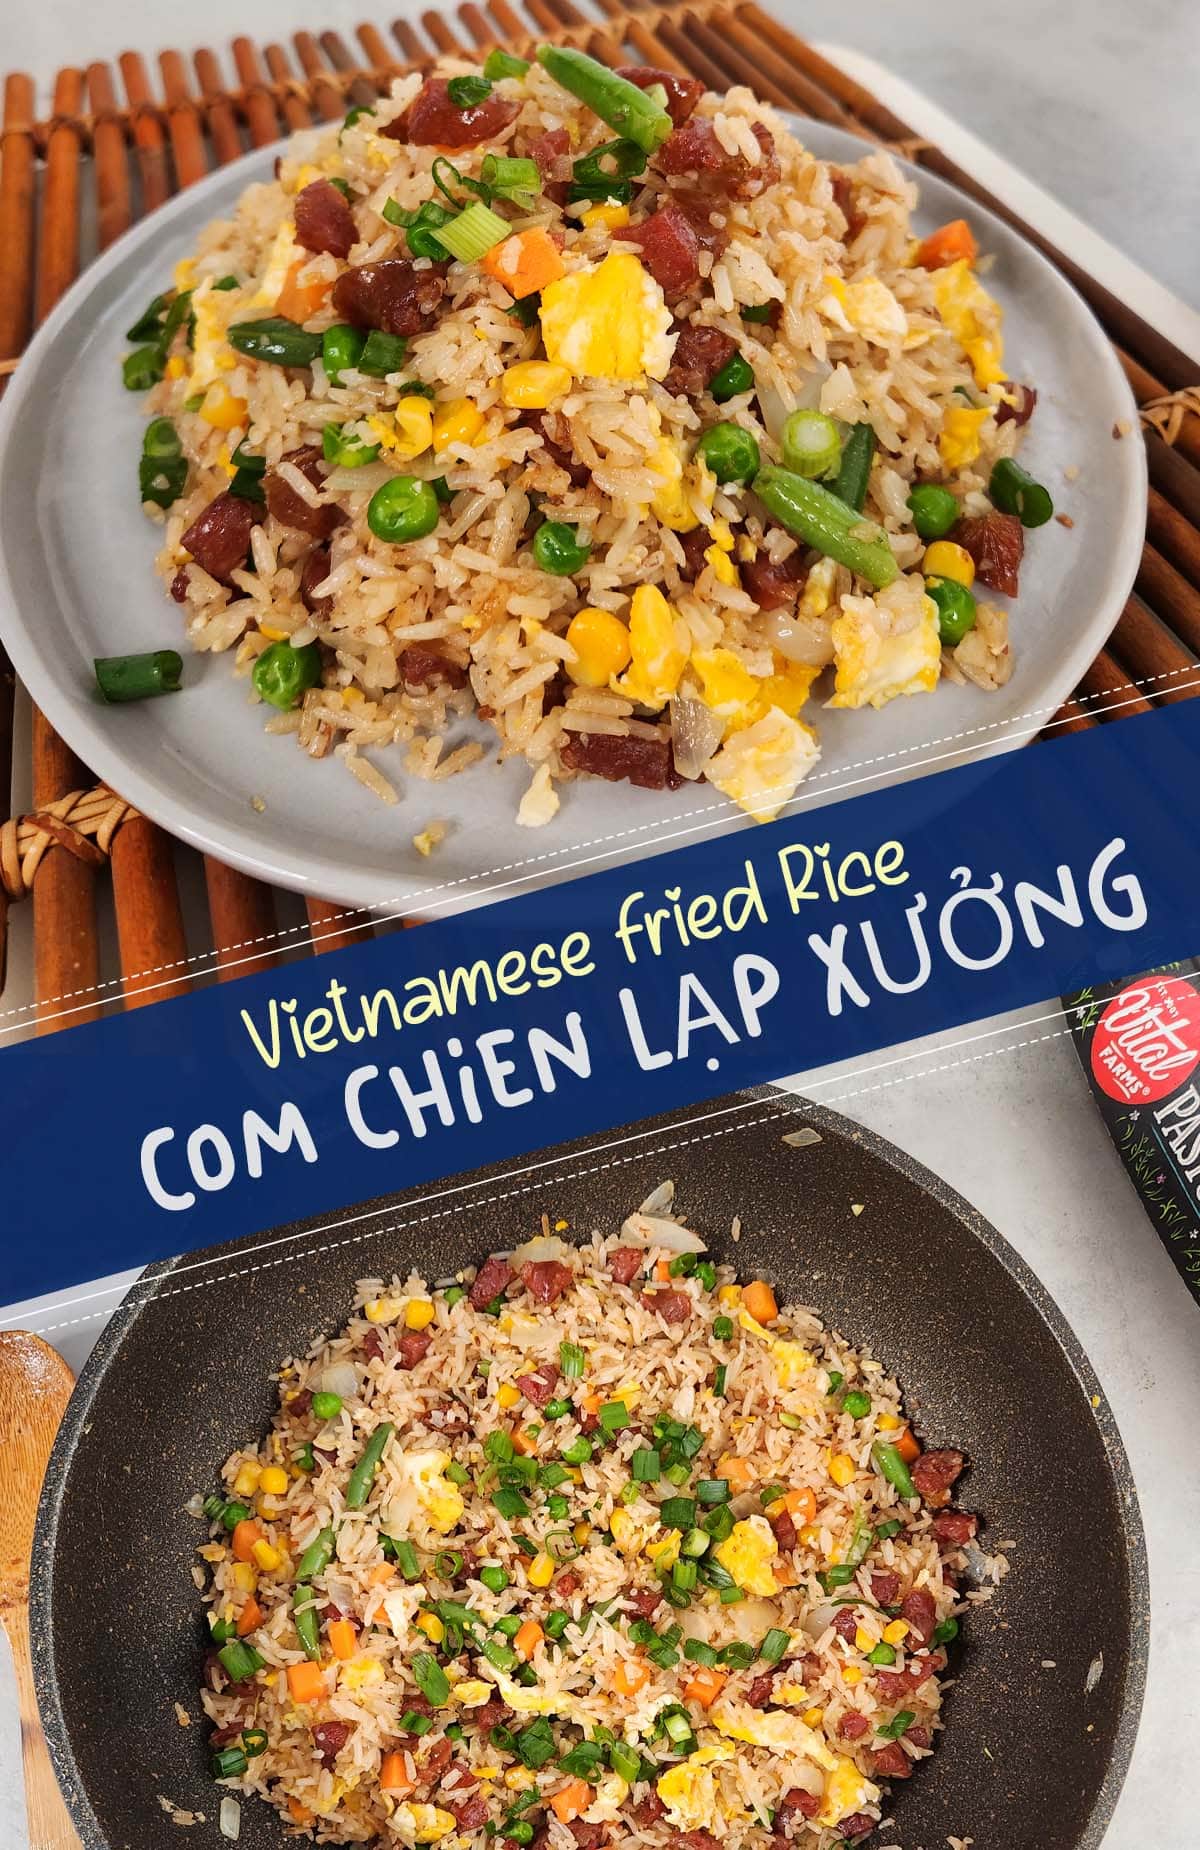 Learn how to make Com Chien or Vietnamese Fried Rice with our easy-to-follow recipe. Discover the perfect combination of ingredients and techniques to create a delicious and balanced dish.